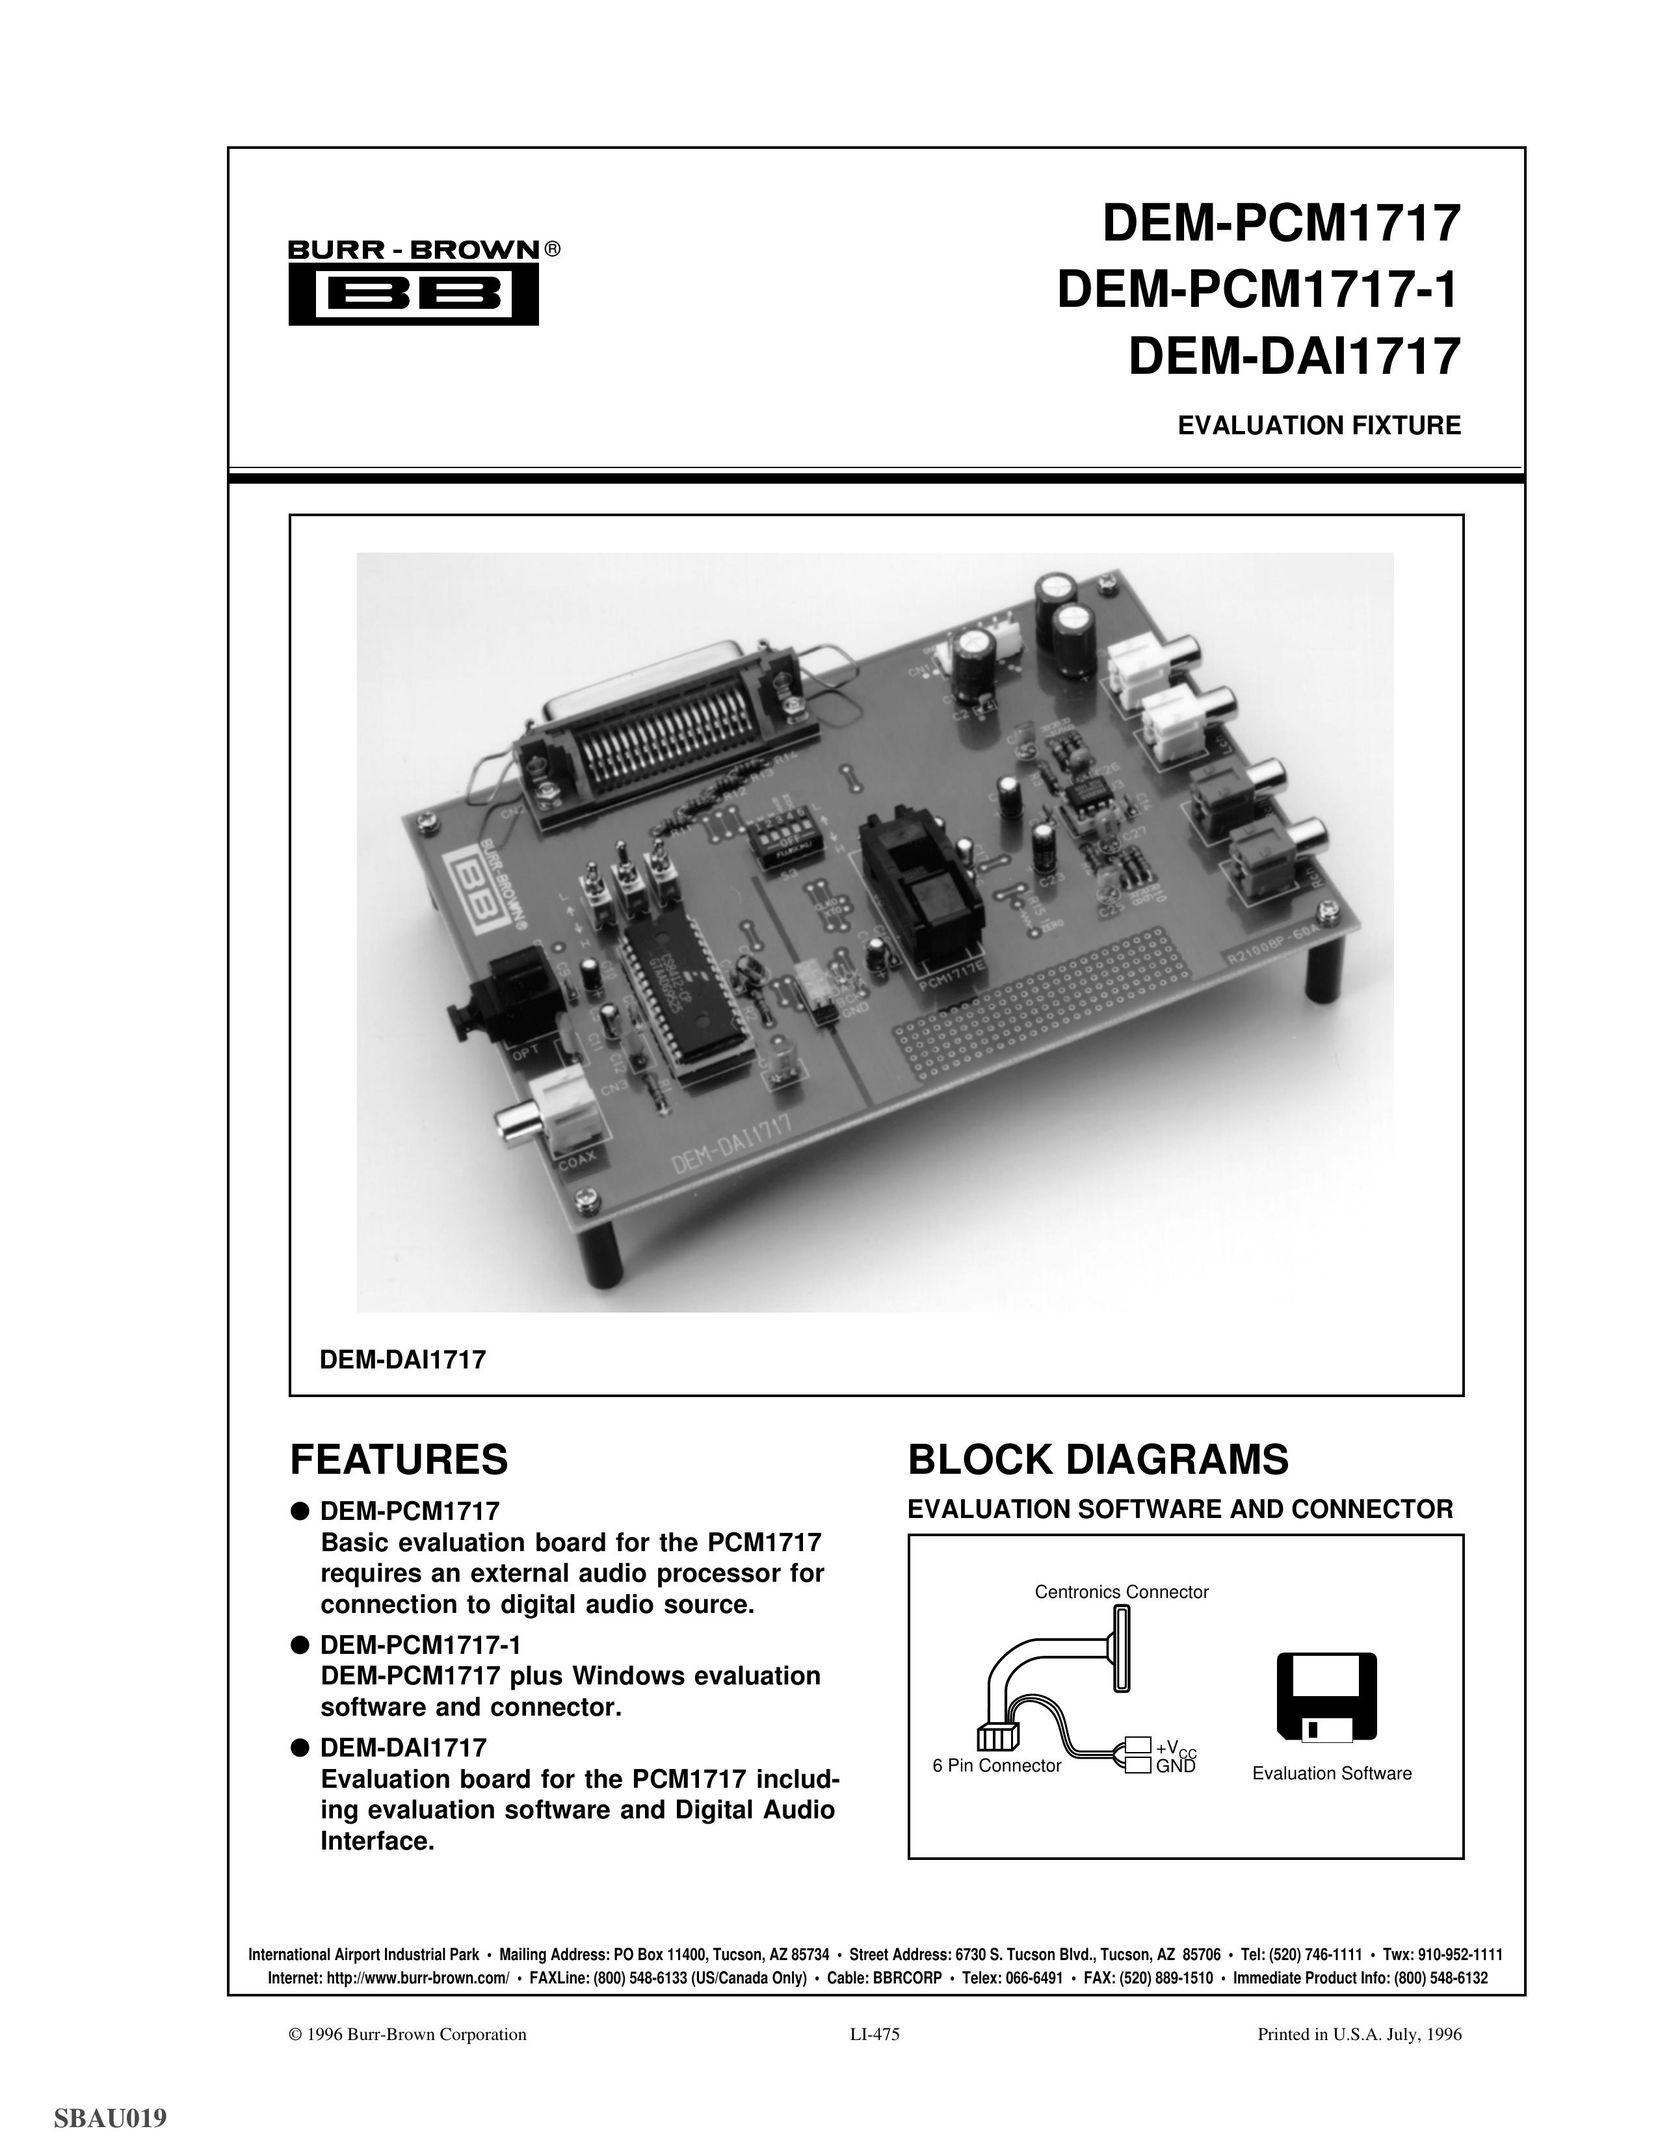 Texas Instruments DEM-PCM1717 Stereo System User Manual